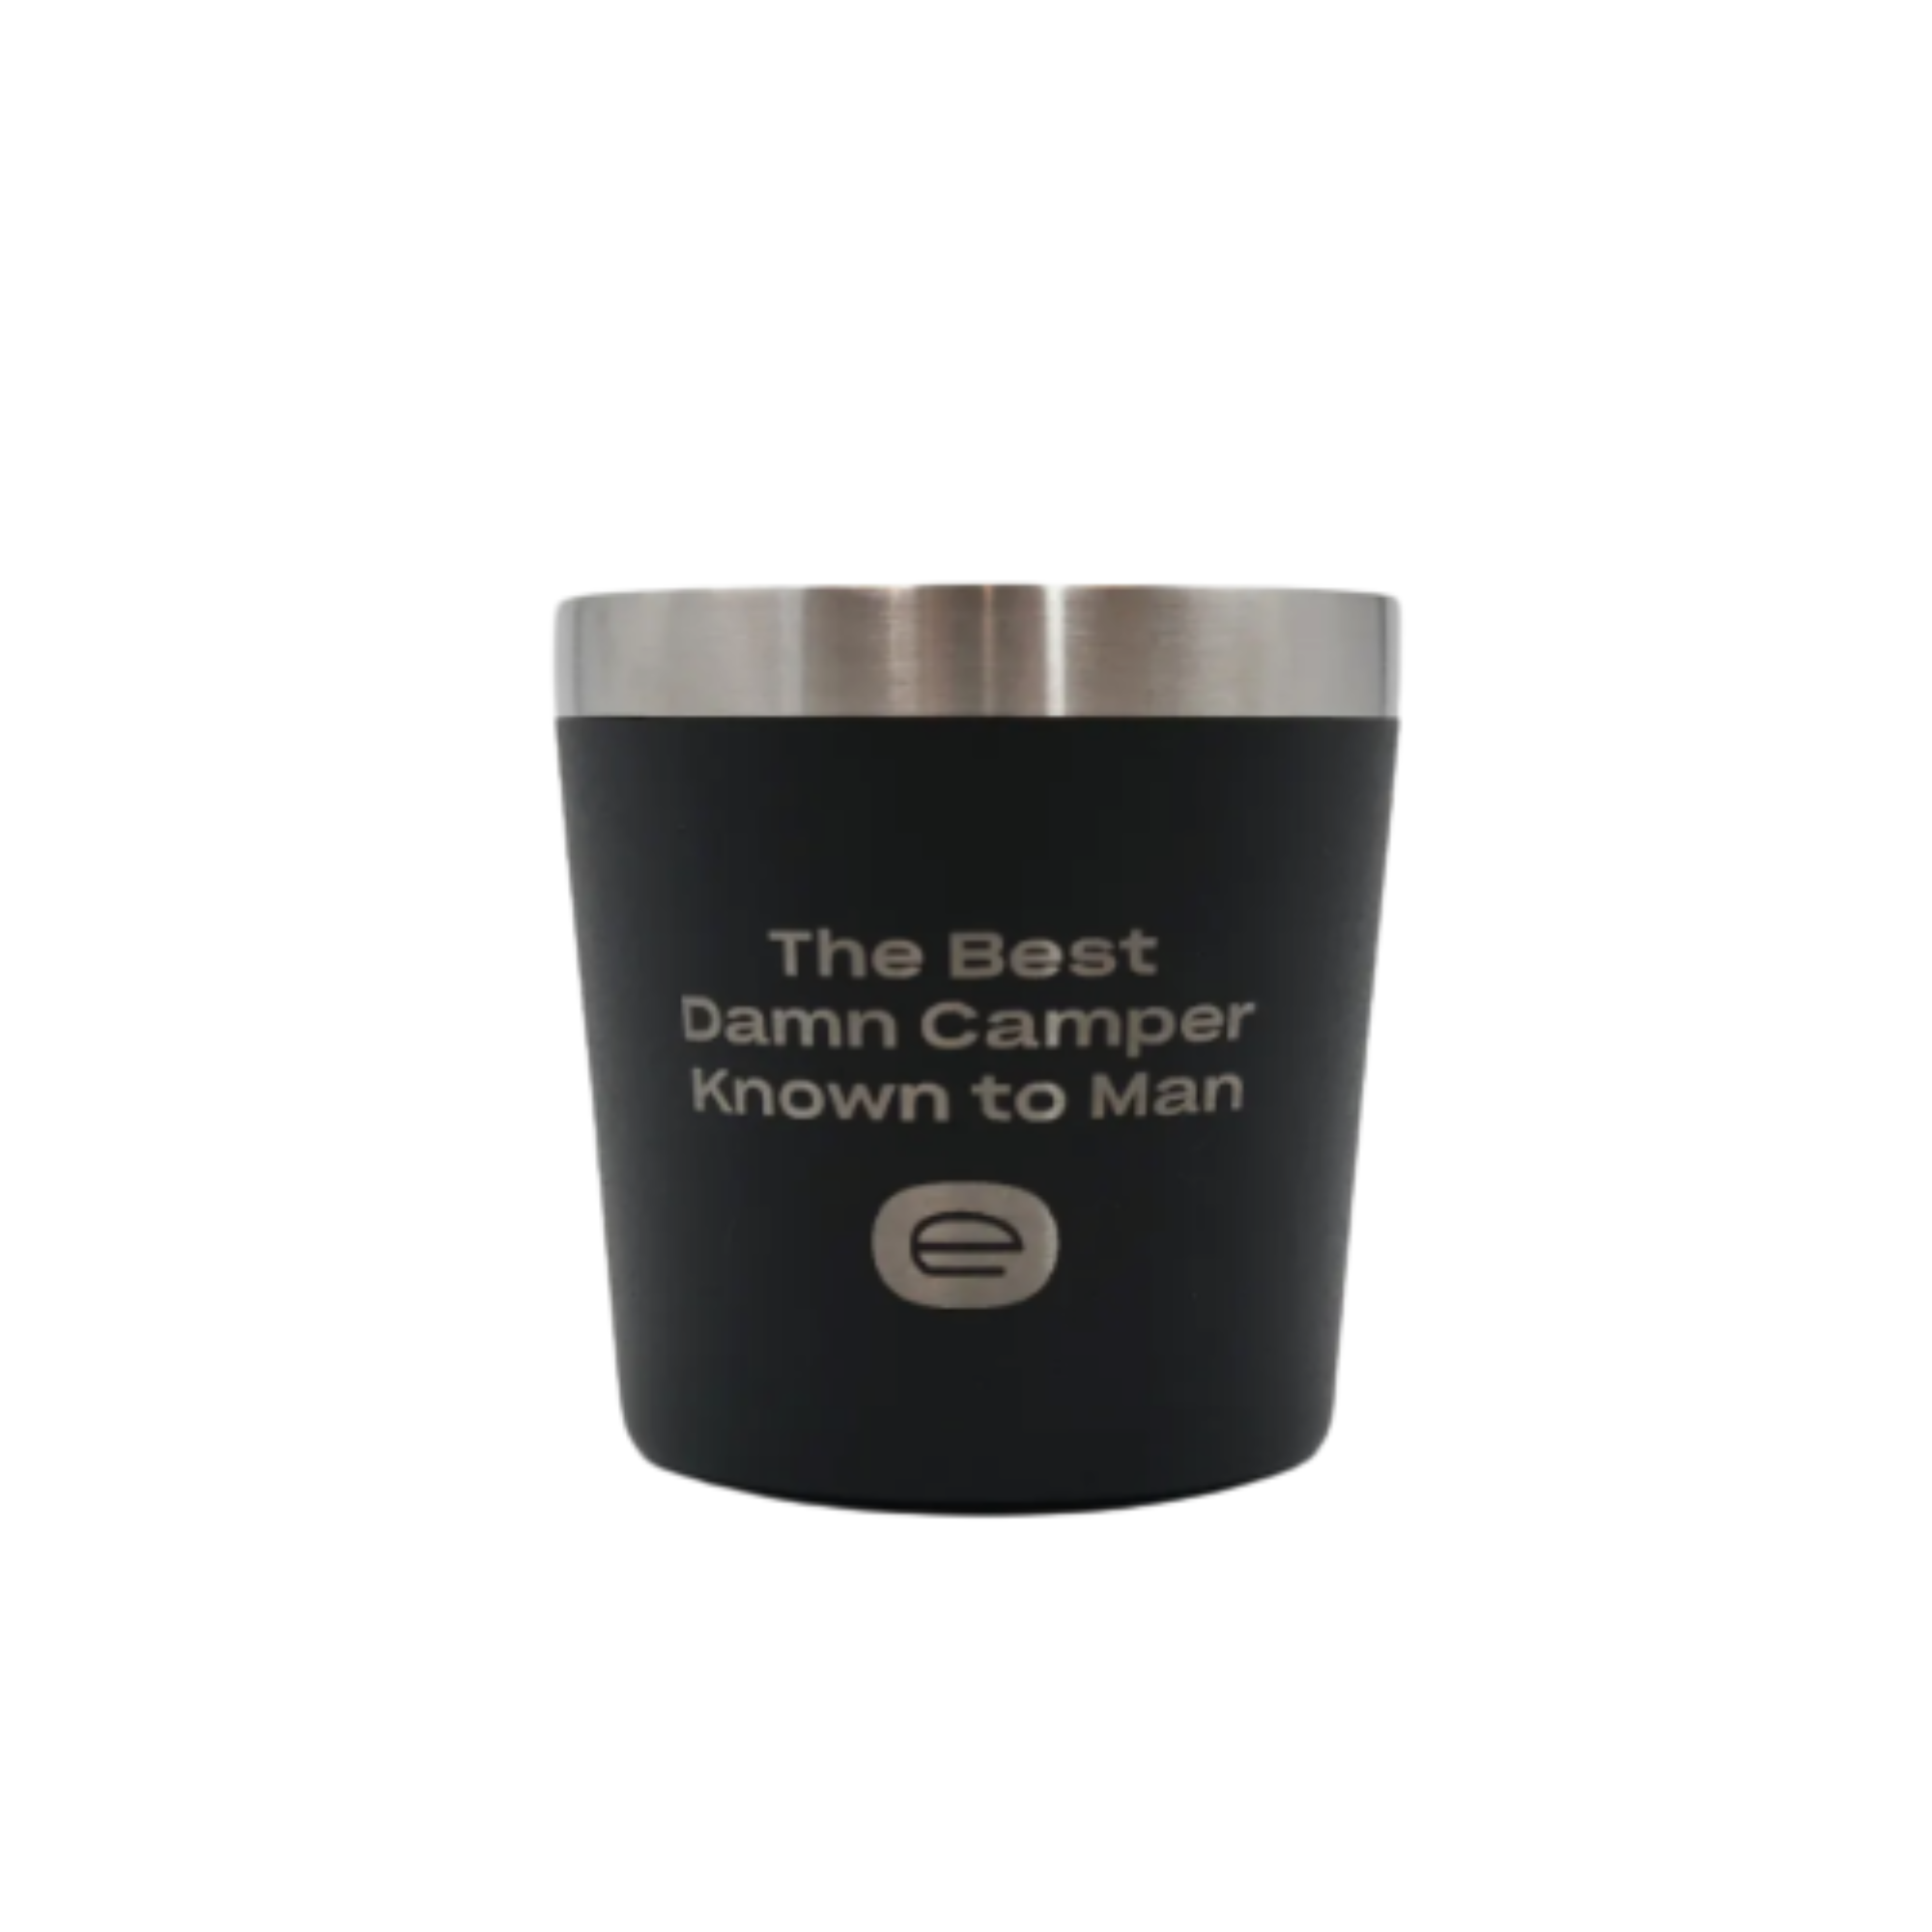 Small obsidian colored camp cup, branded with Escapod's Best Damn Camper Known To Man slogan. Used as a durable cup for camping in your teardrop trailer. 